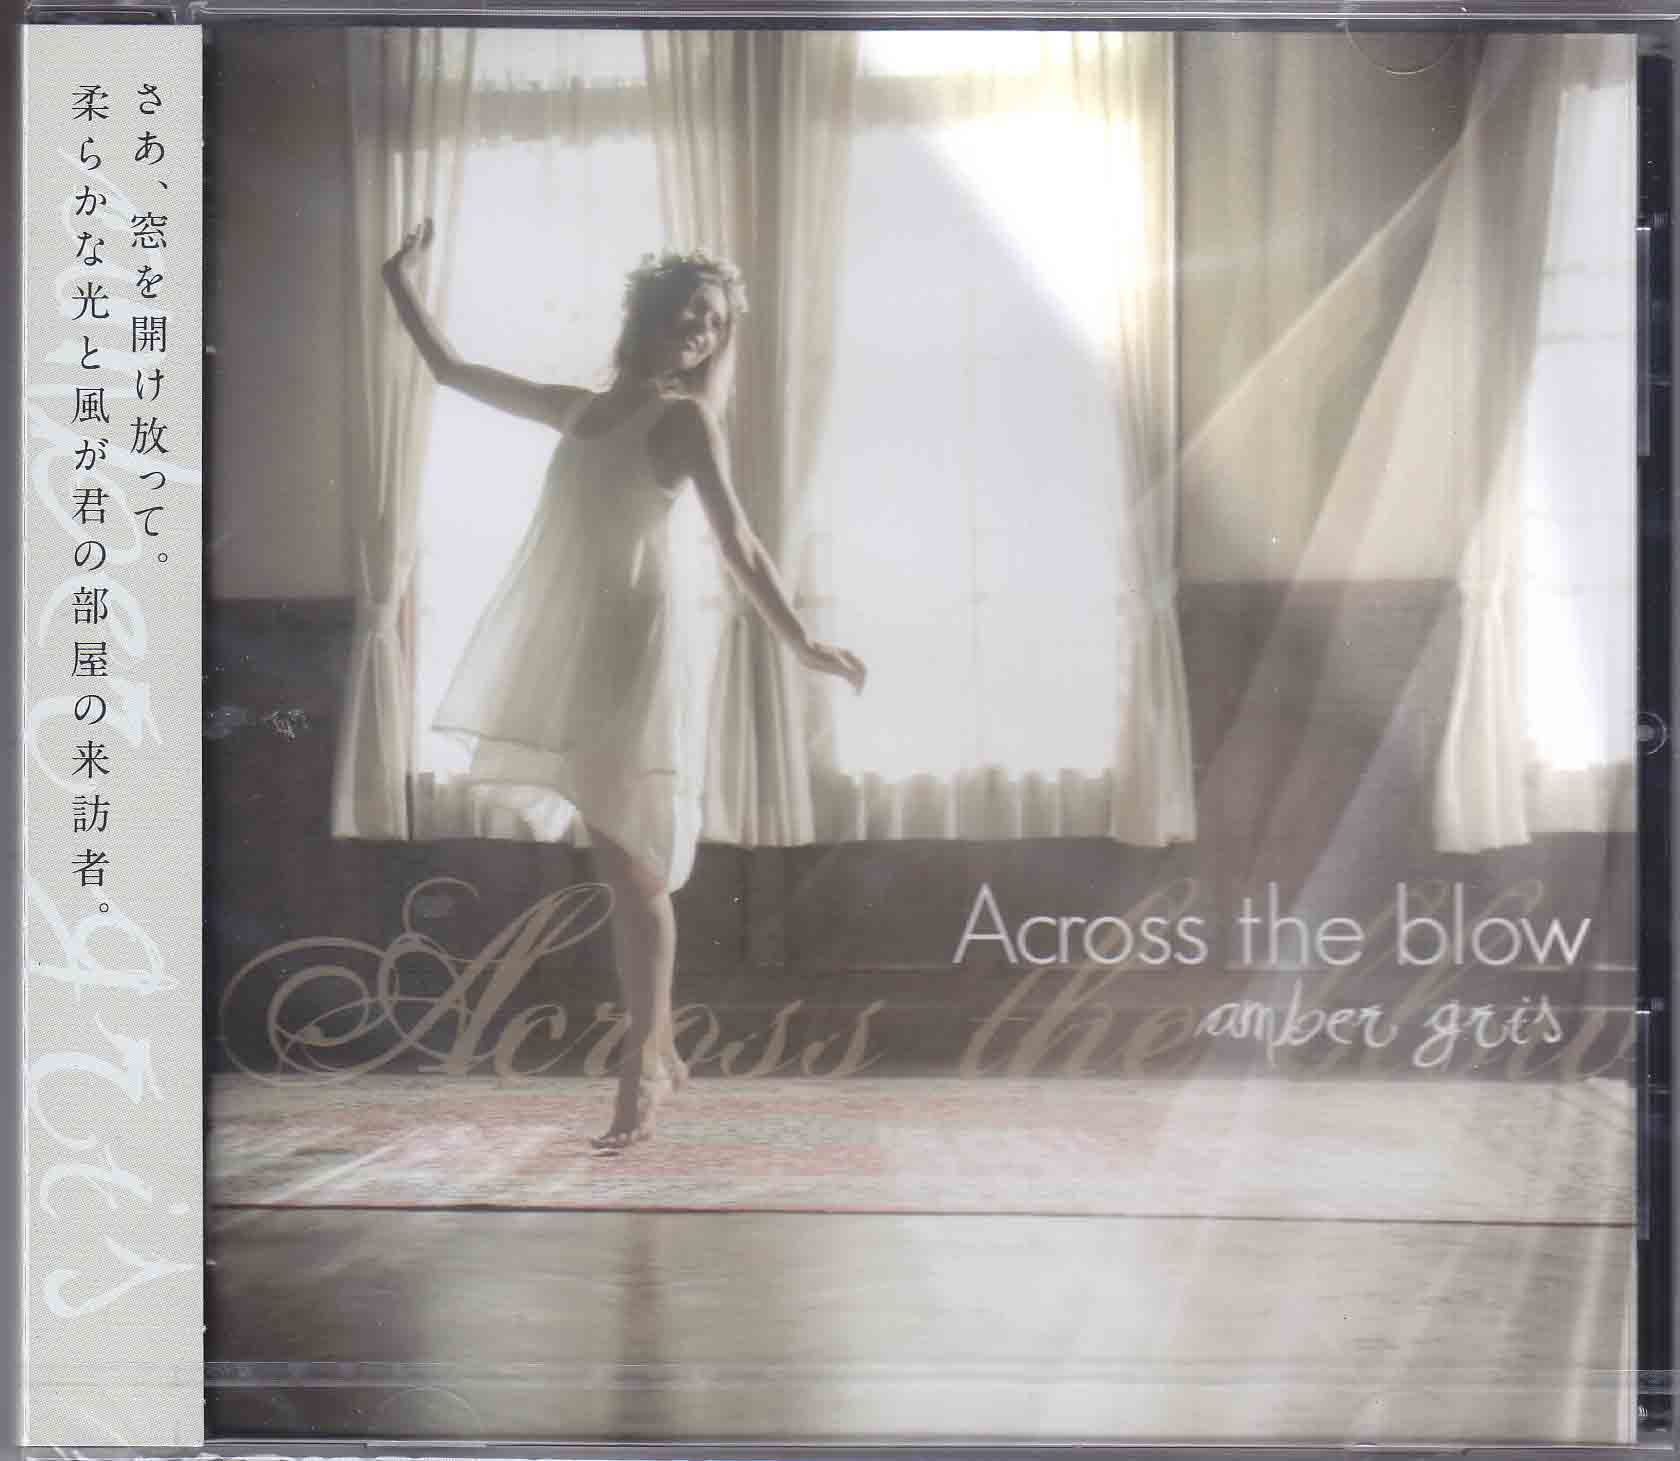 amber gris ( アンバーグリス )  の CD Across the blow